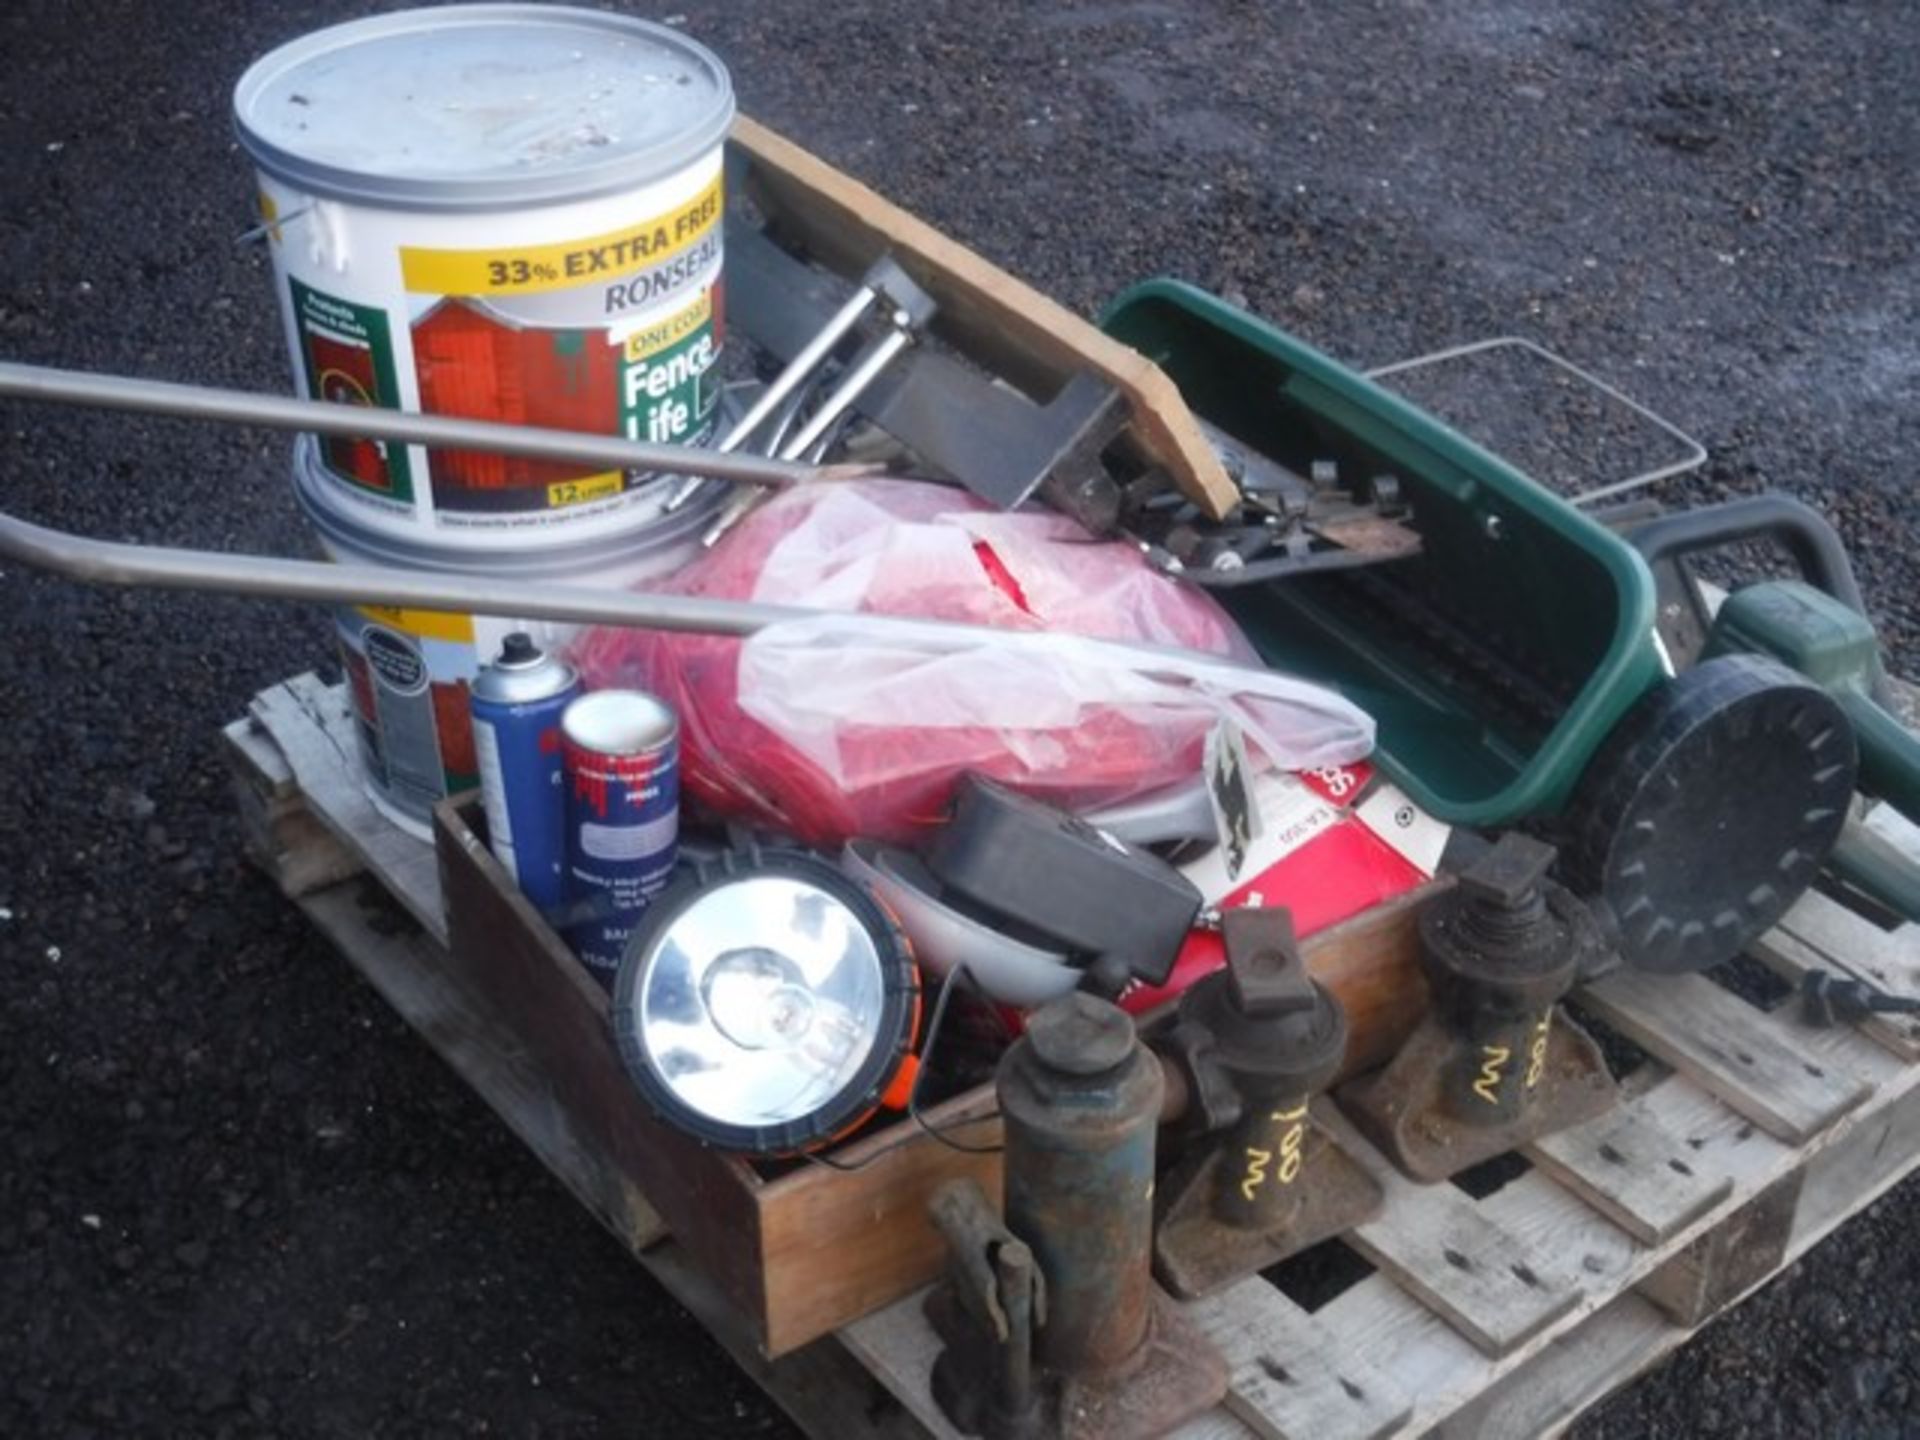 VARIOUS TOOLS - LAWN SPREADER, JACKS, VICE, DRUMS OF FENCE PAINT - Image 4 of 10